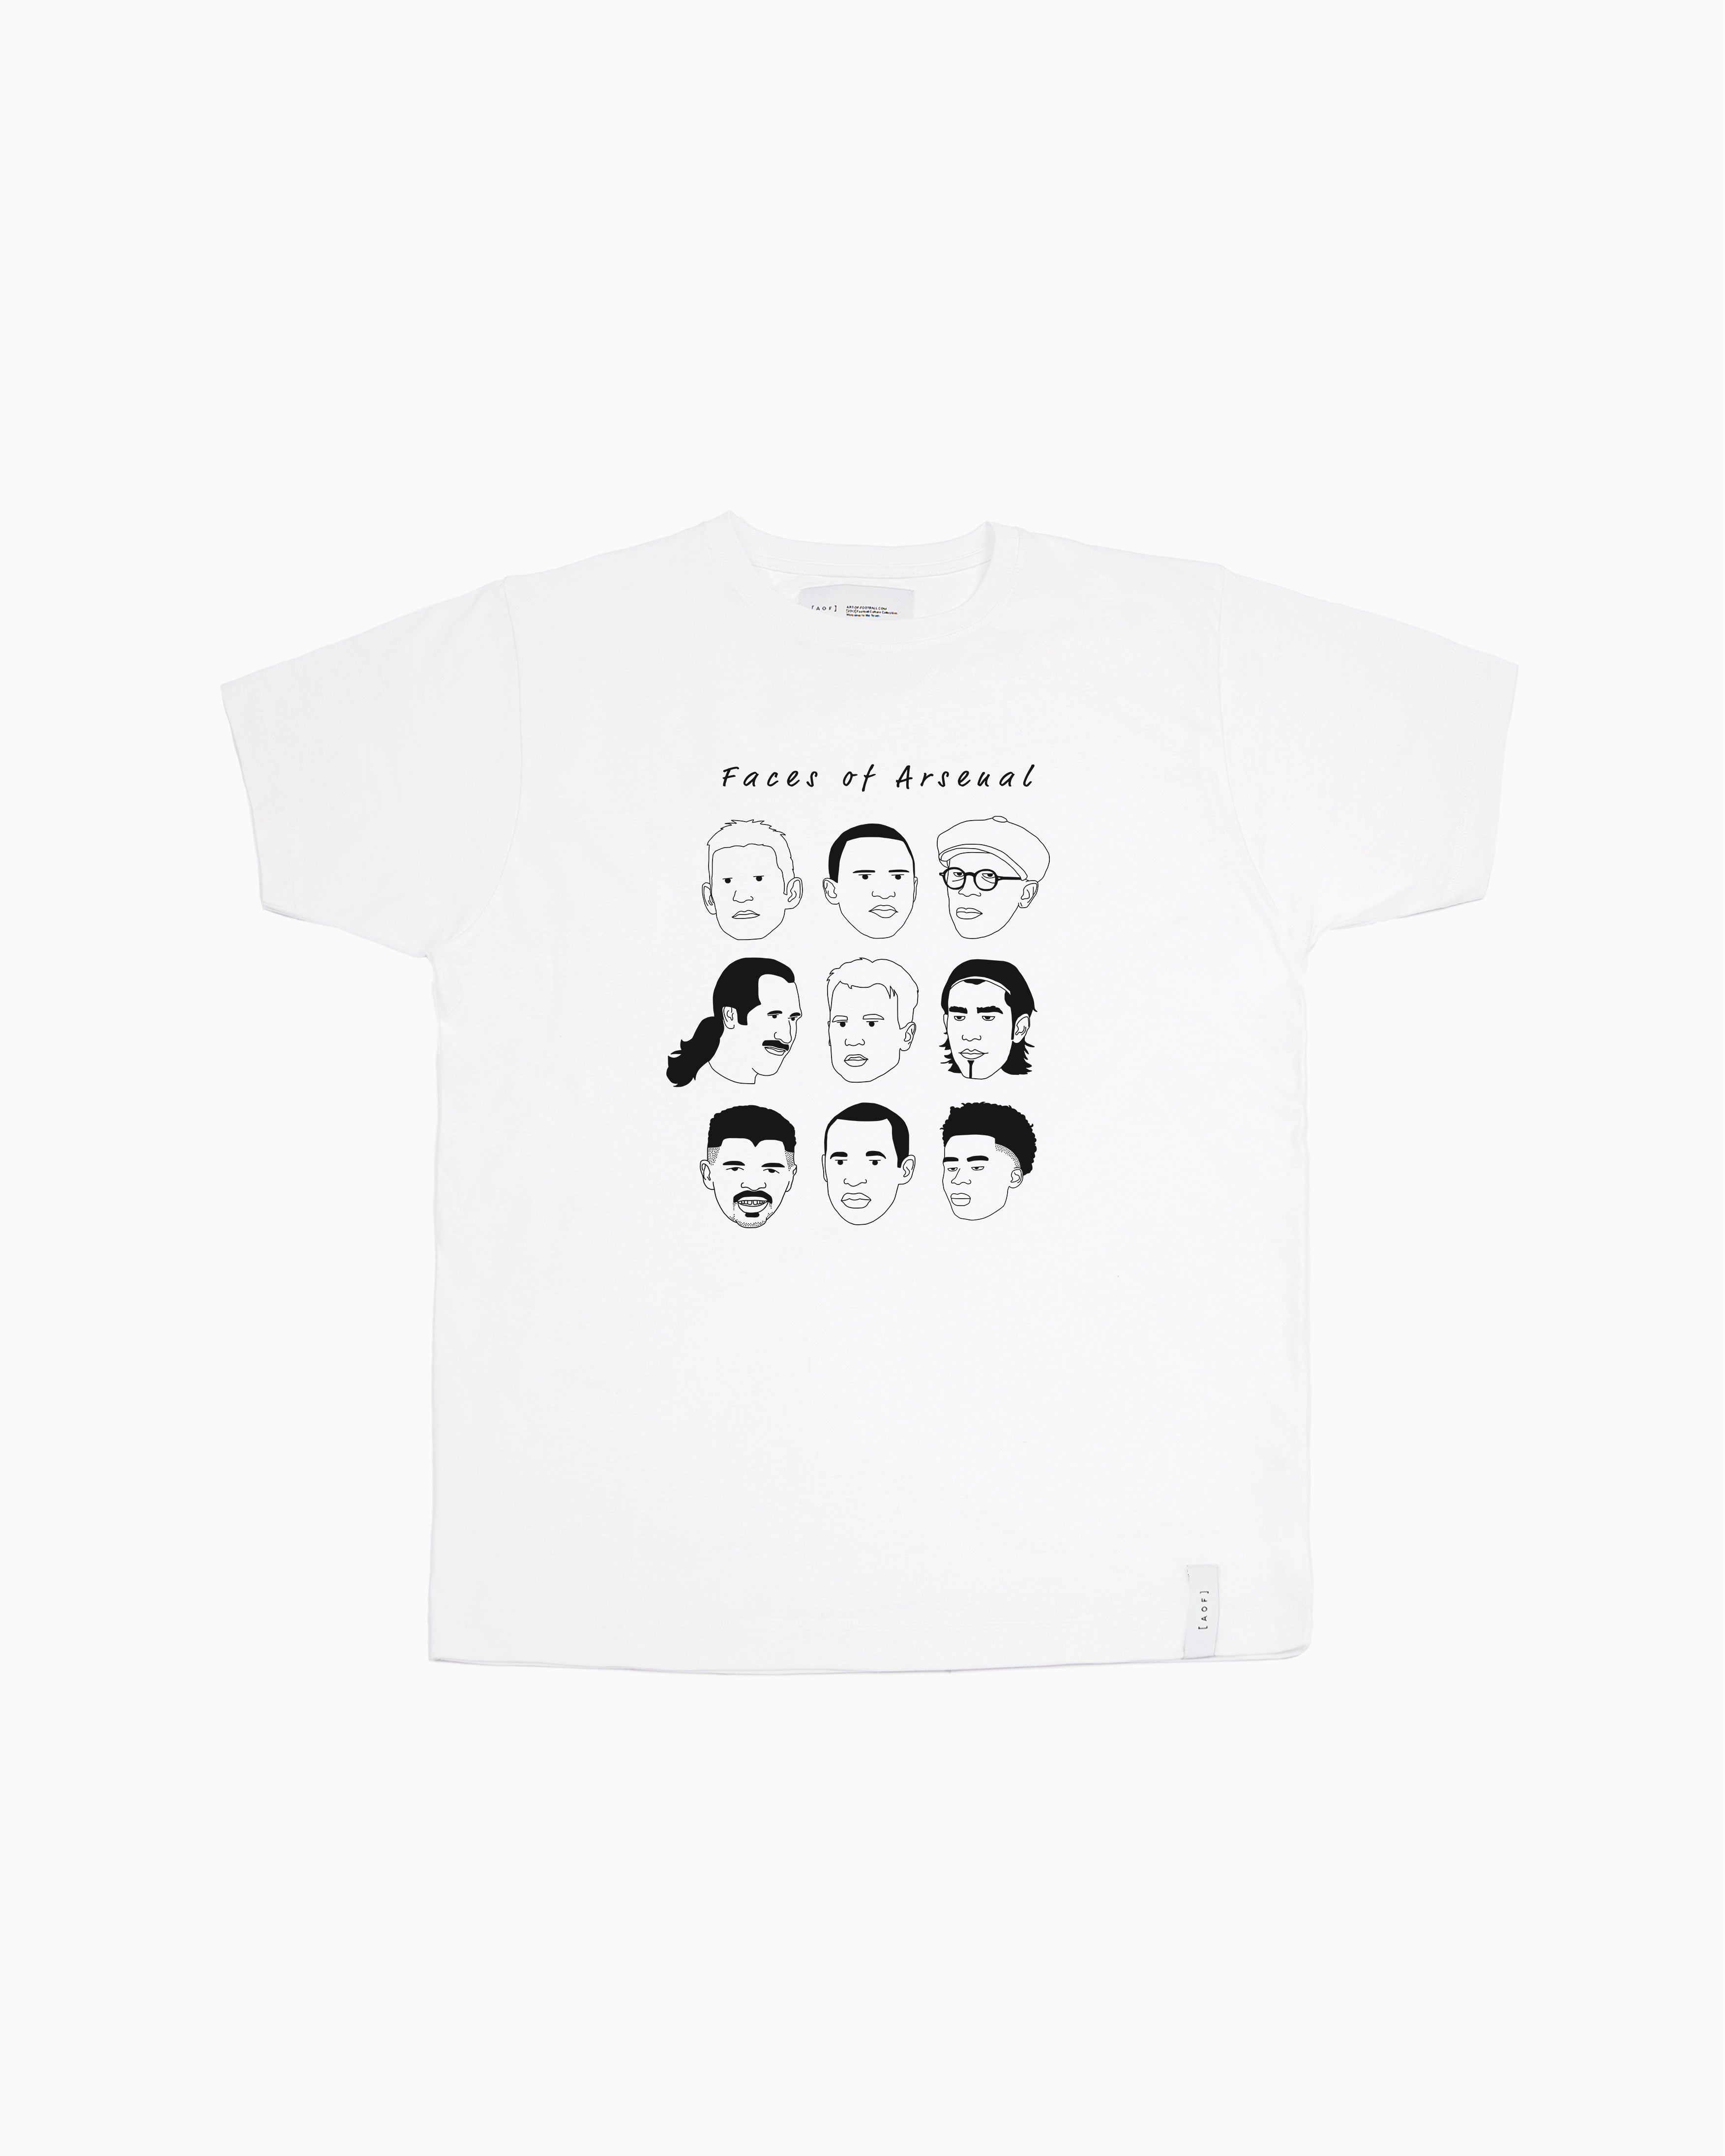 Faces of Arsenal - Tee or Sweat